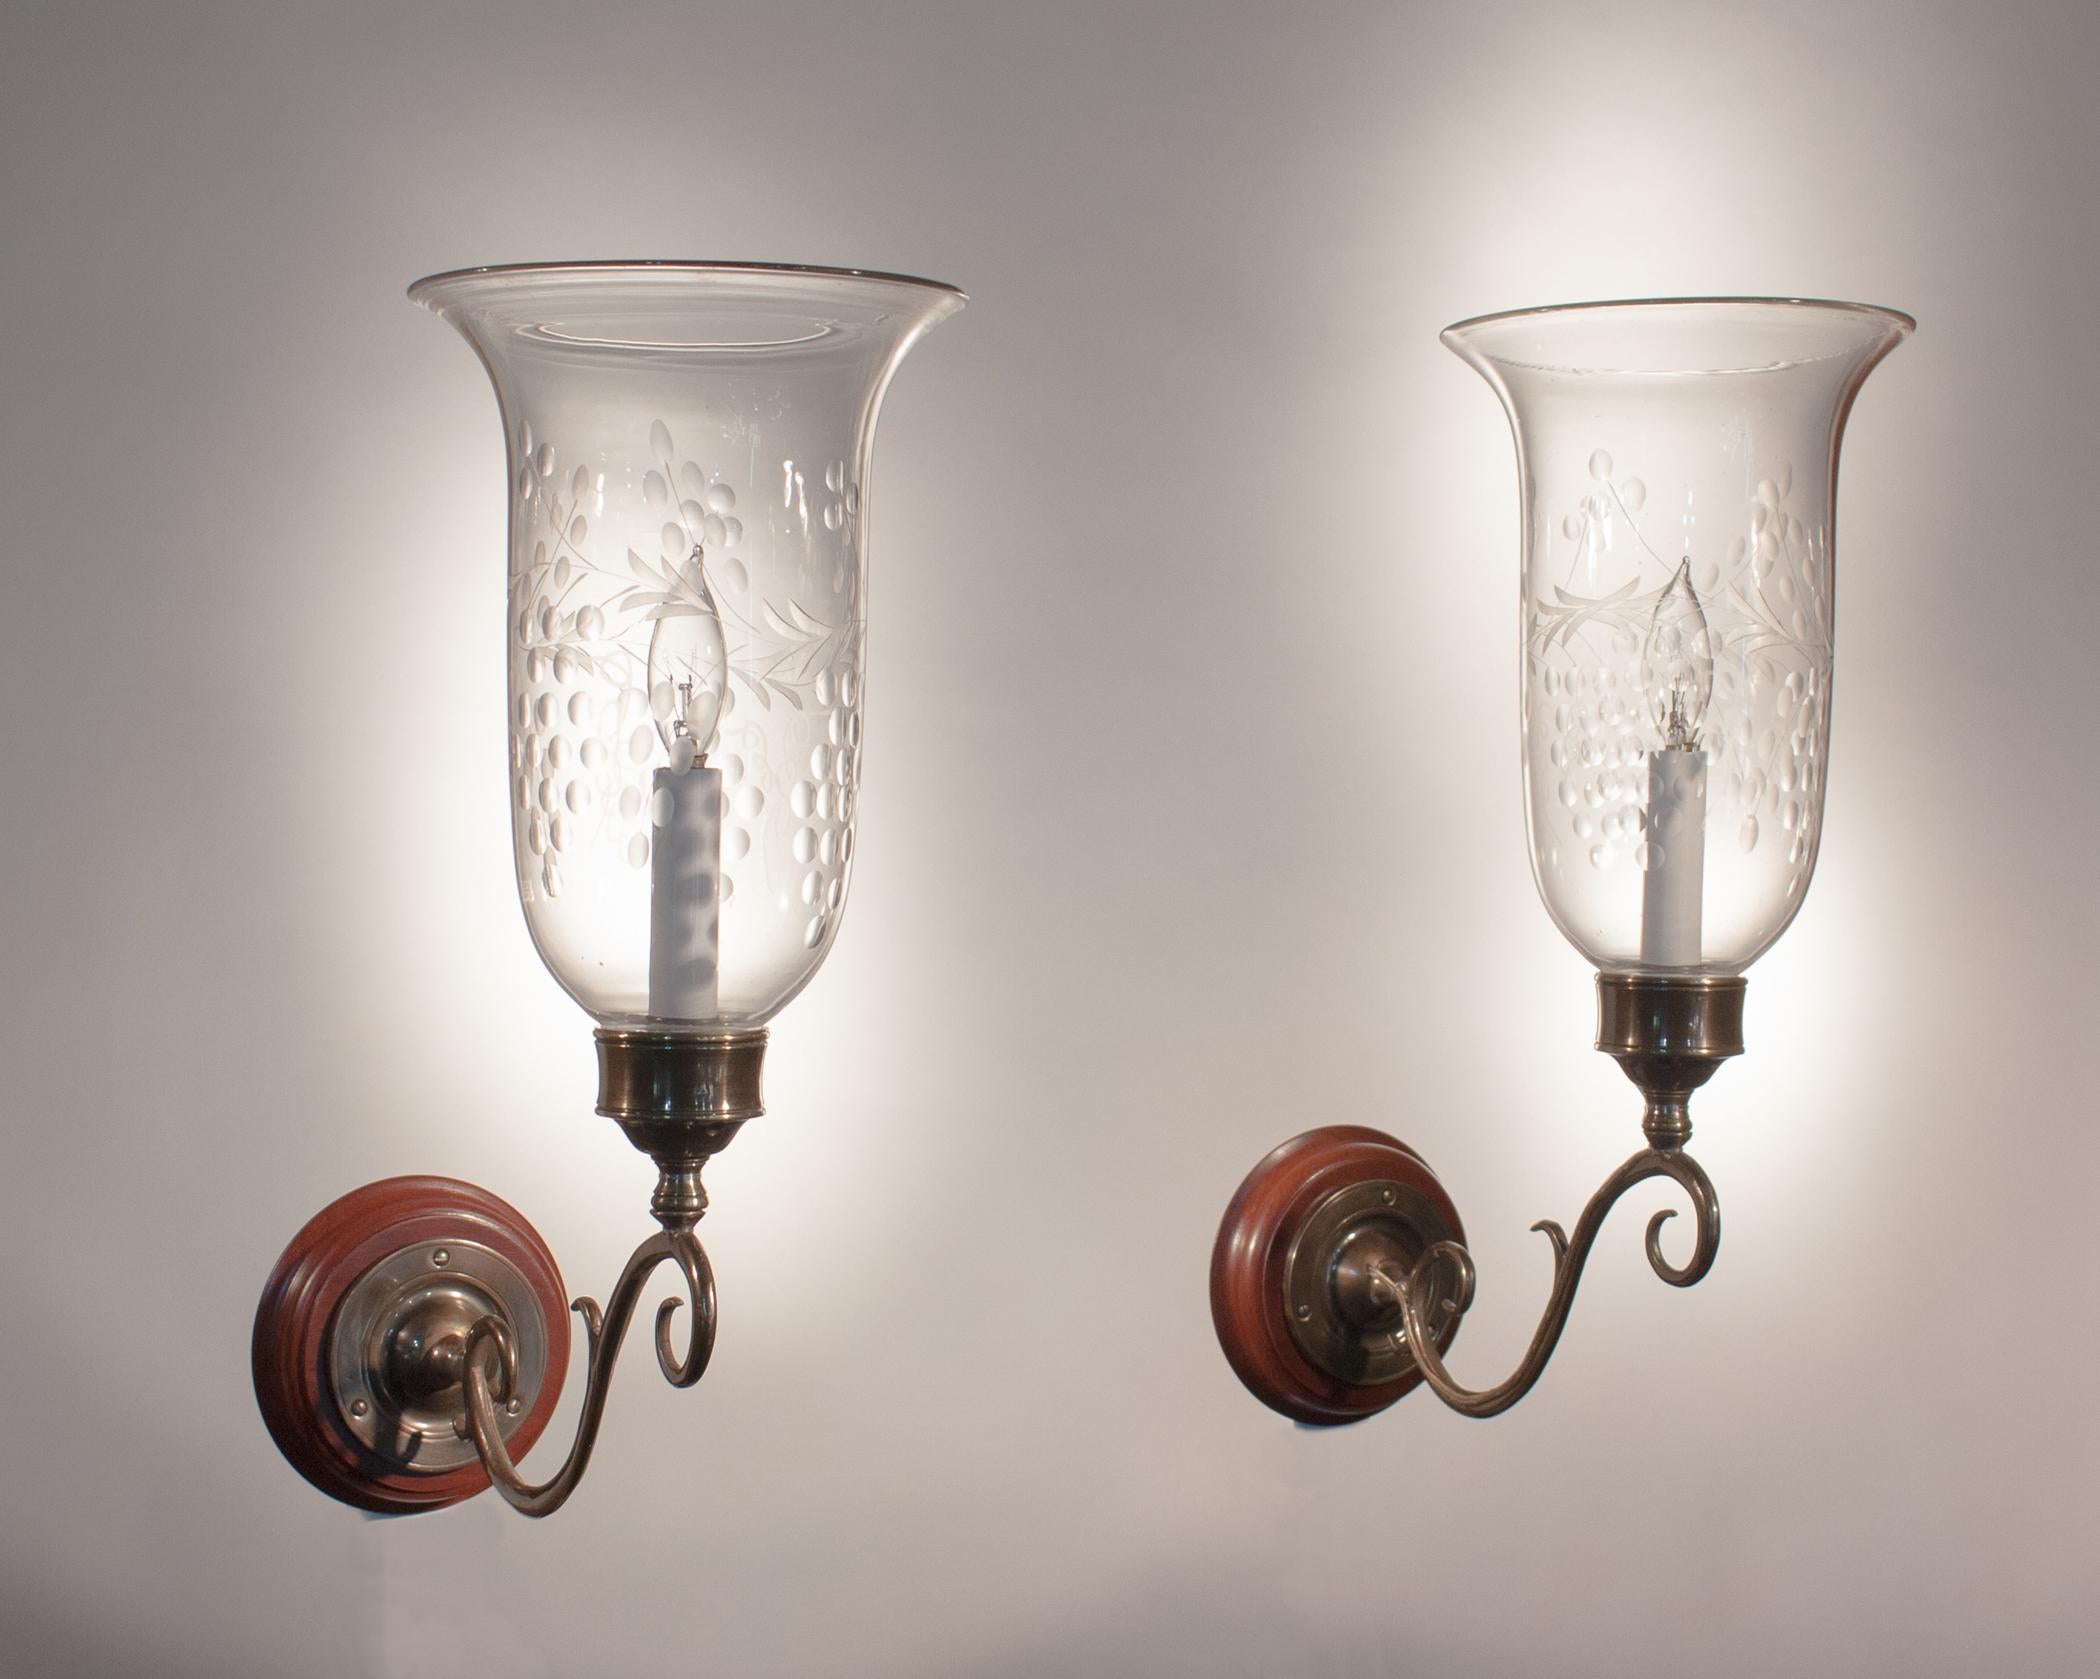 Pair of English hurricane sconce shades with a lovely flared form and an etched grape and vine motif. These circa 1870 shades have very faint fogginess in spots, which is not uncommon in hand blown glass of this age. There is also a small chip on